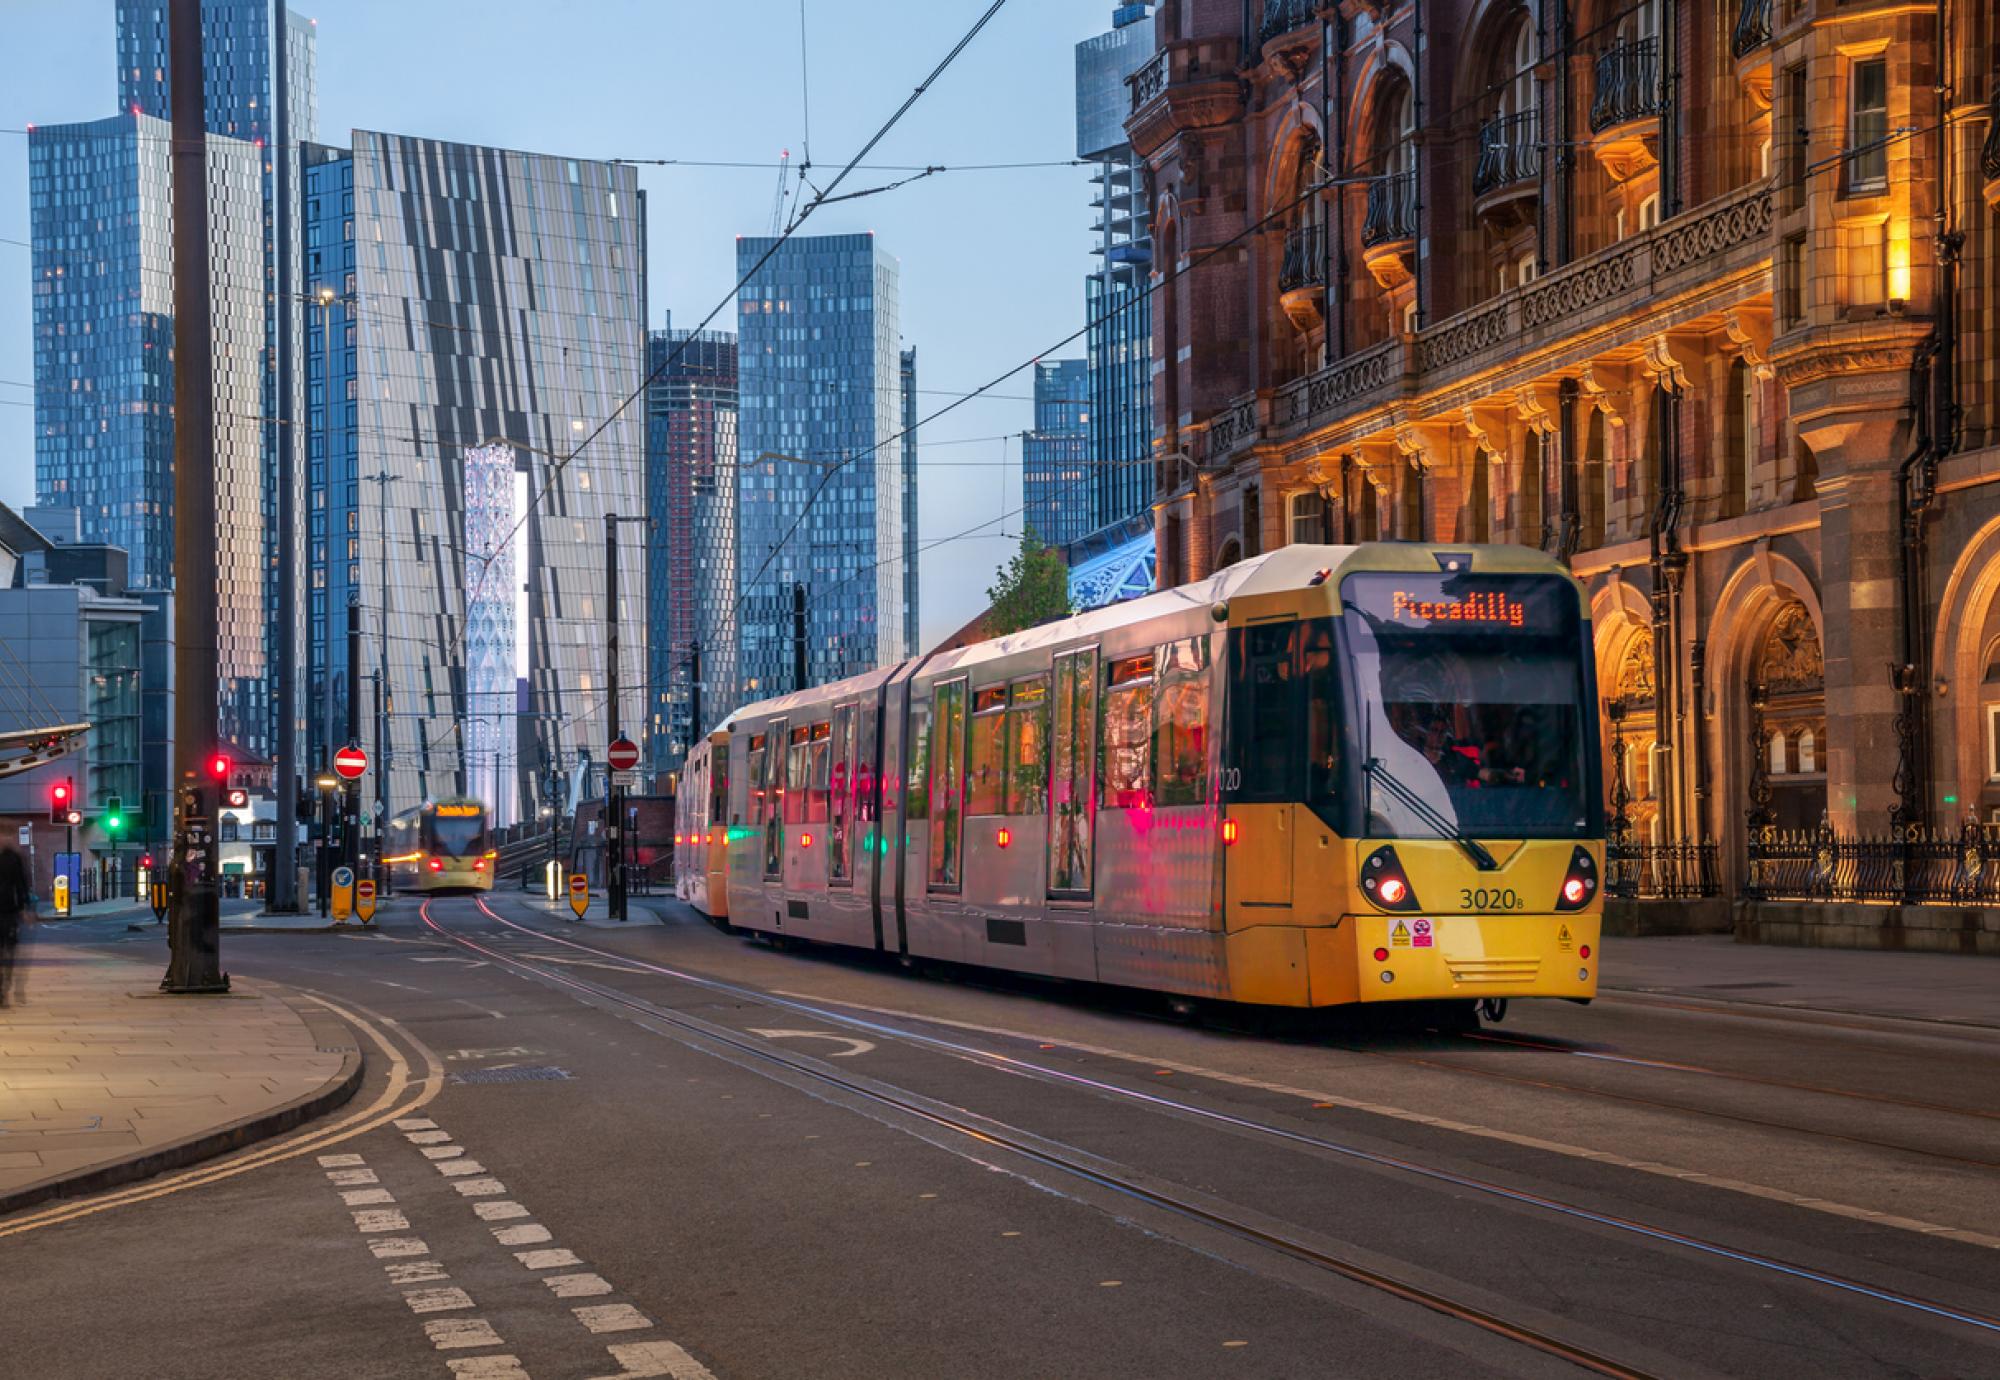 A Tram in Manchester's city centre